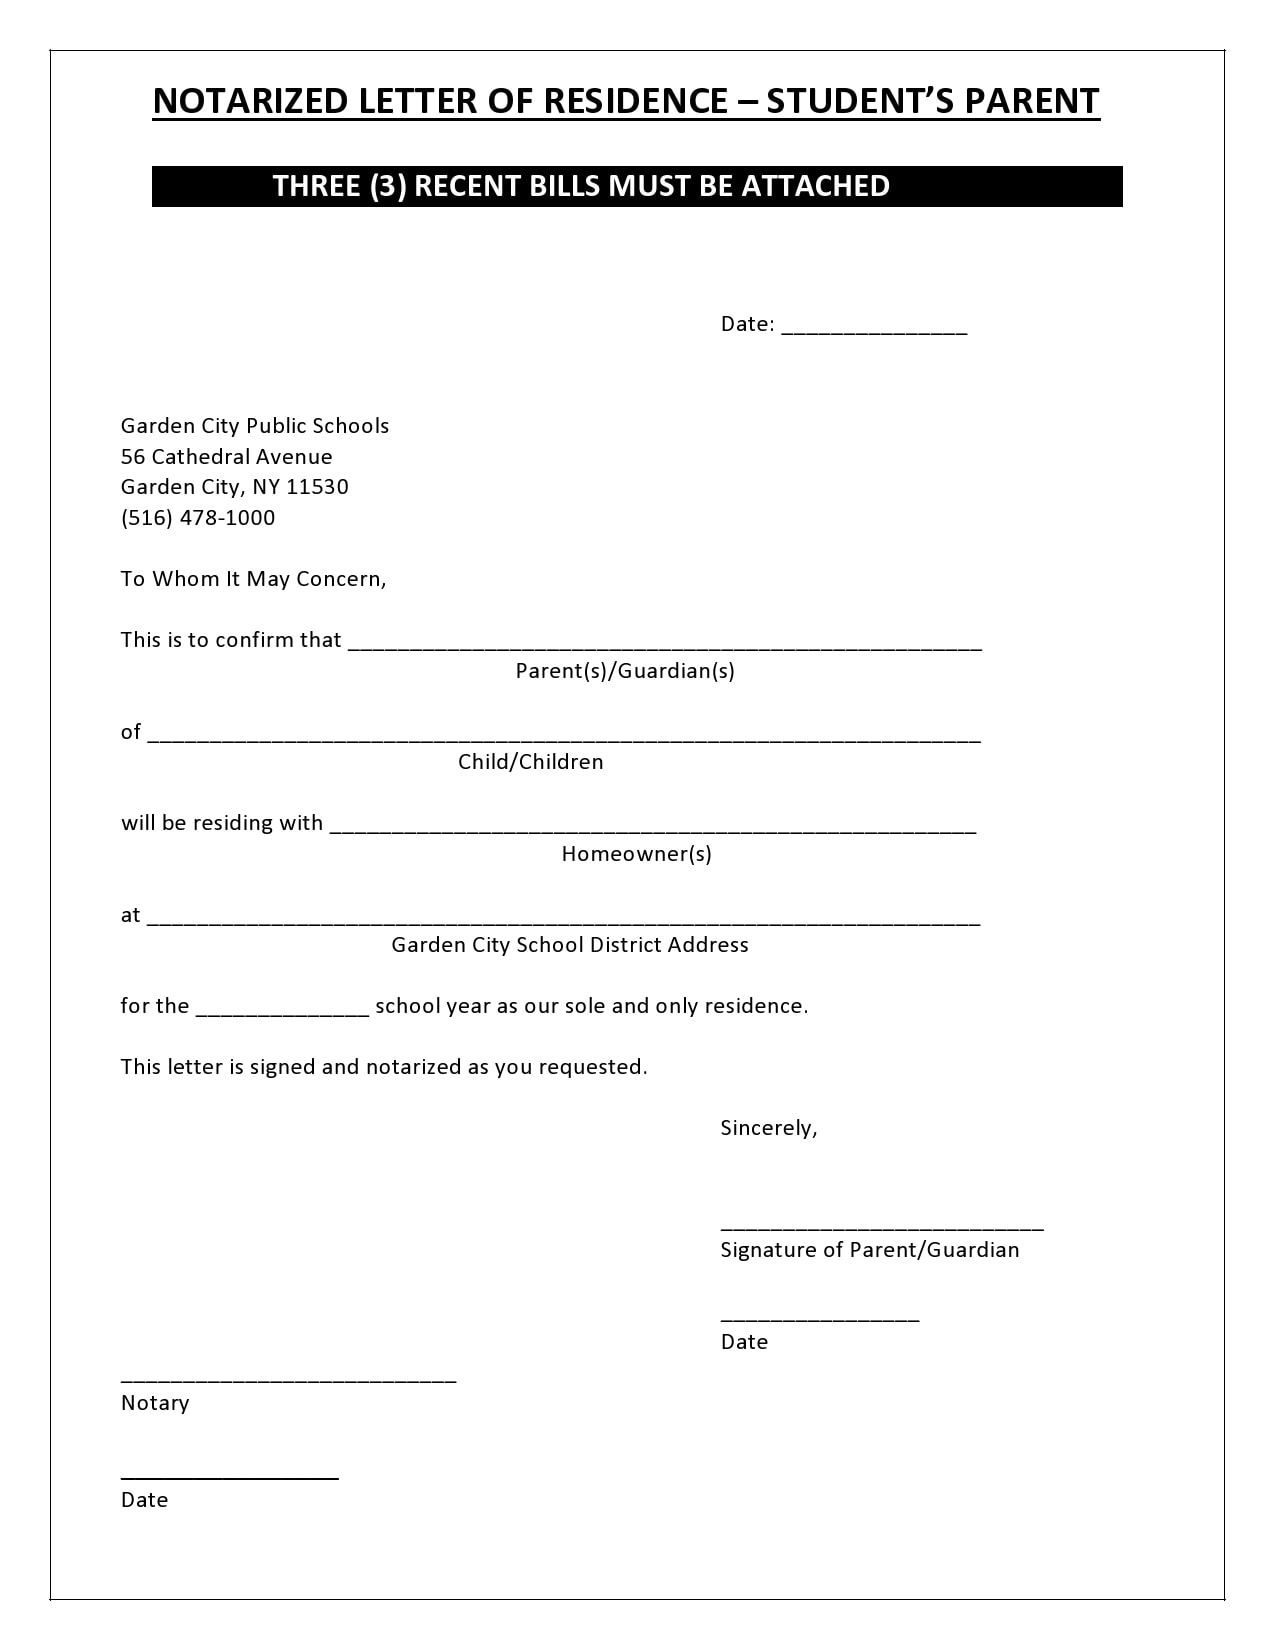 30 Free Notarized Letter Templates {Notary Letters